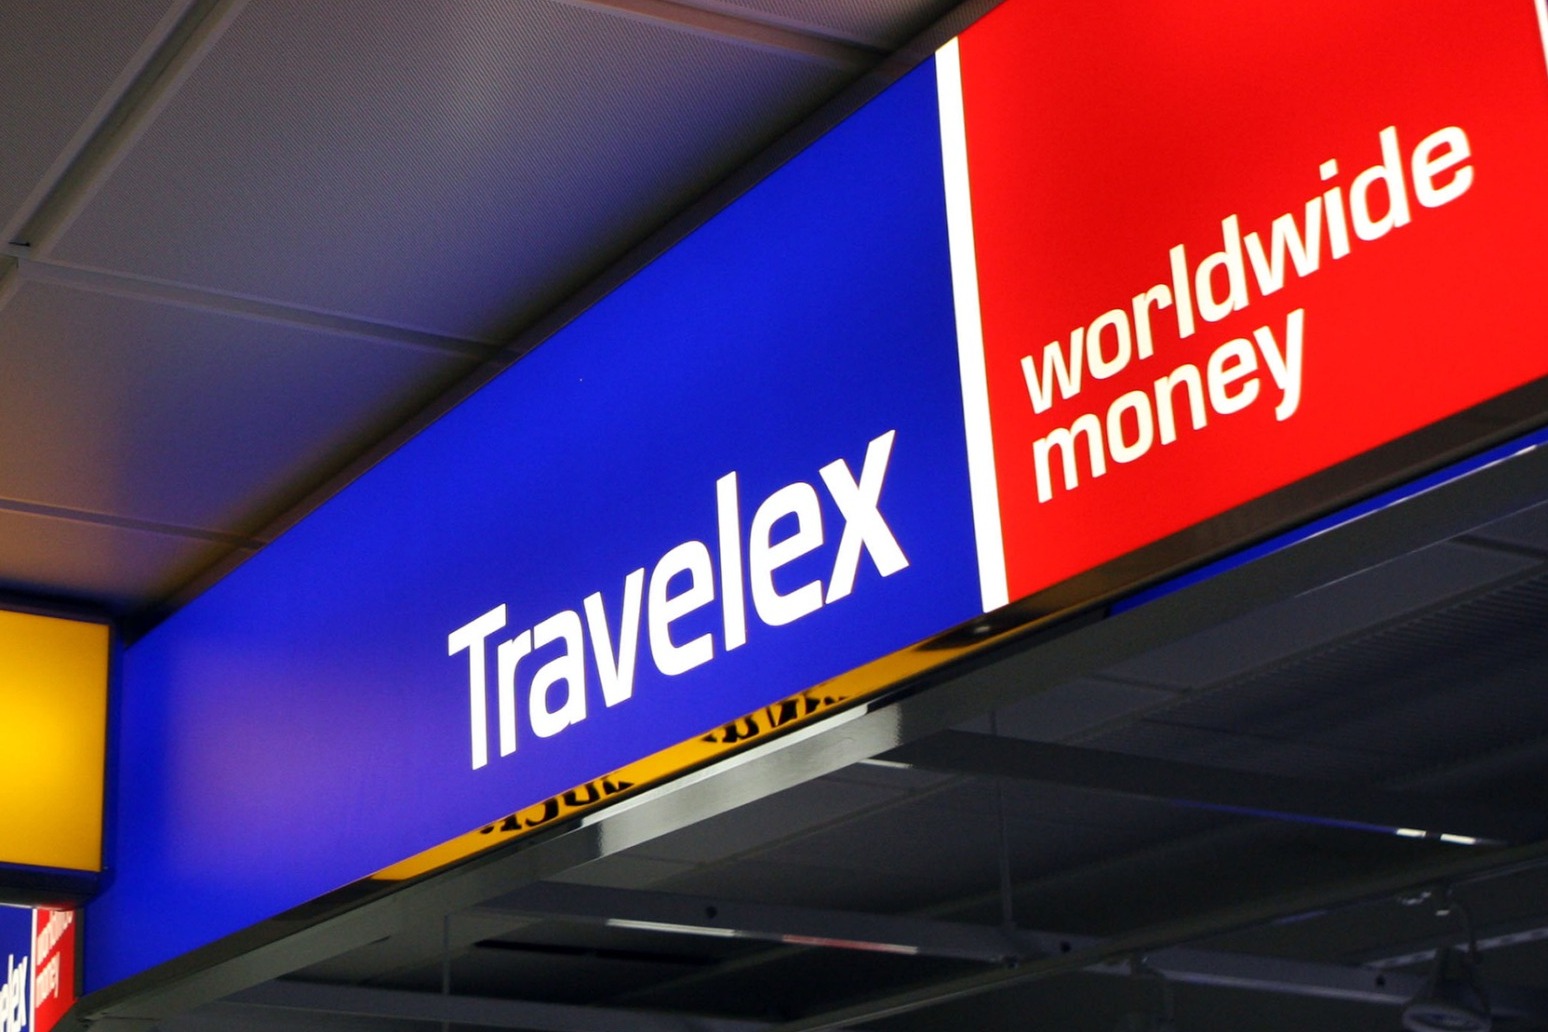 Travelex is to relaunch some foreign money exchange services 